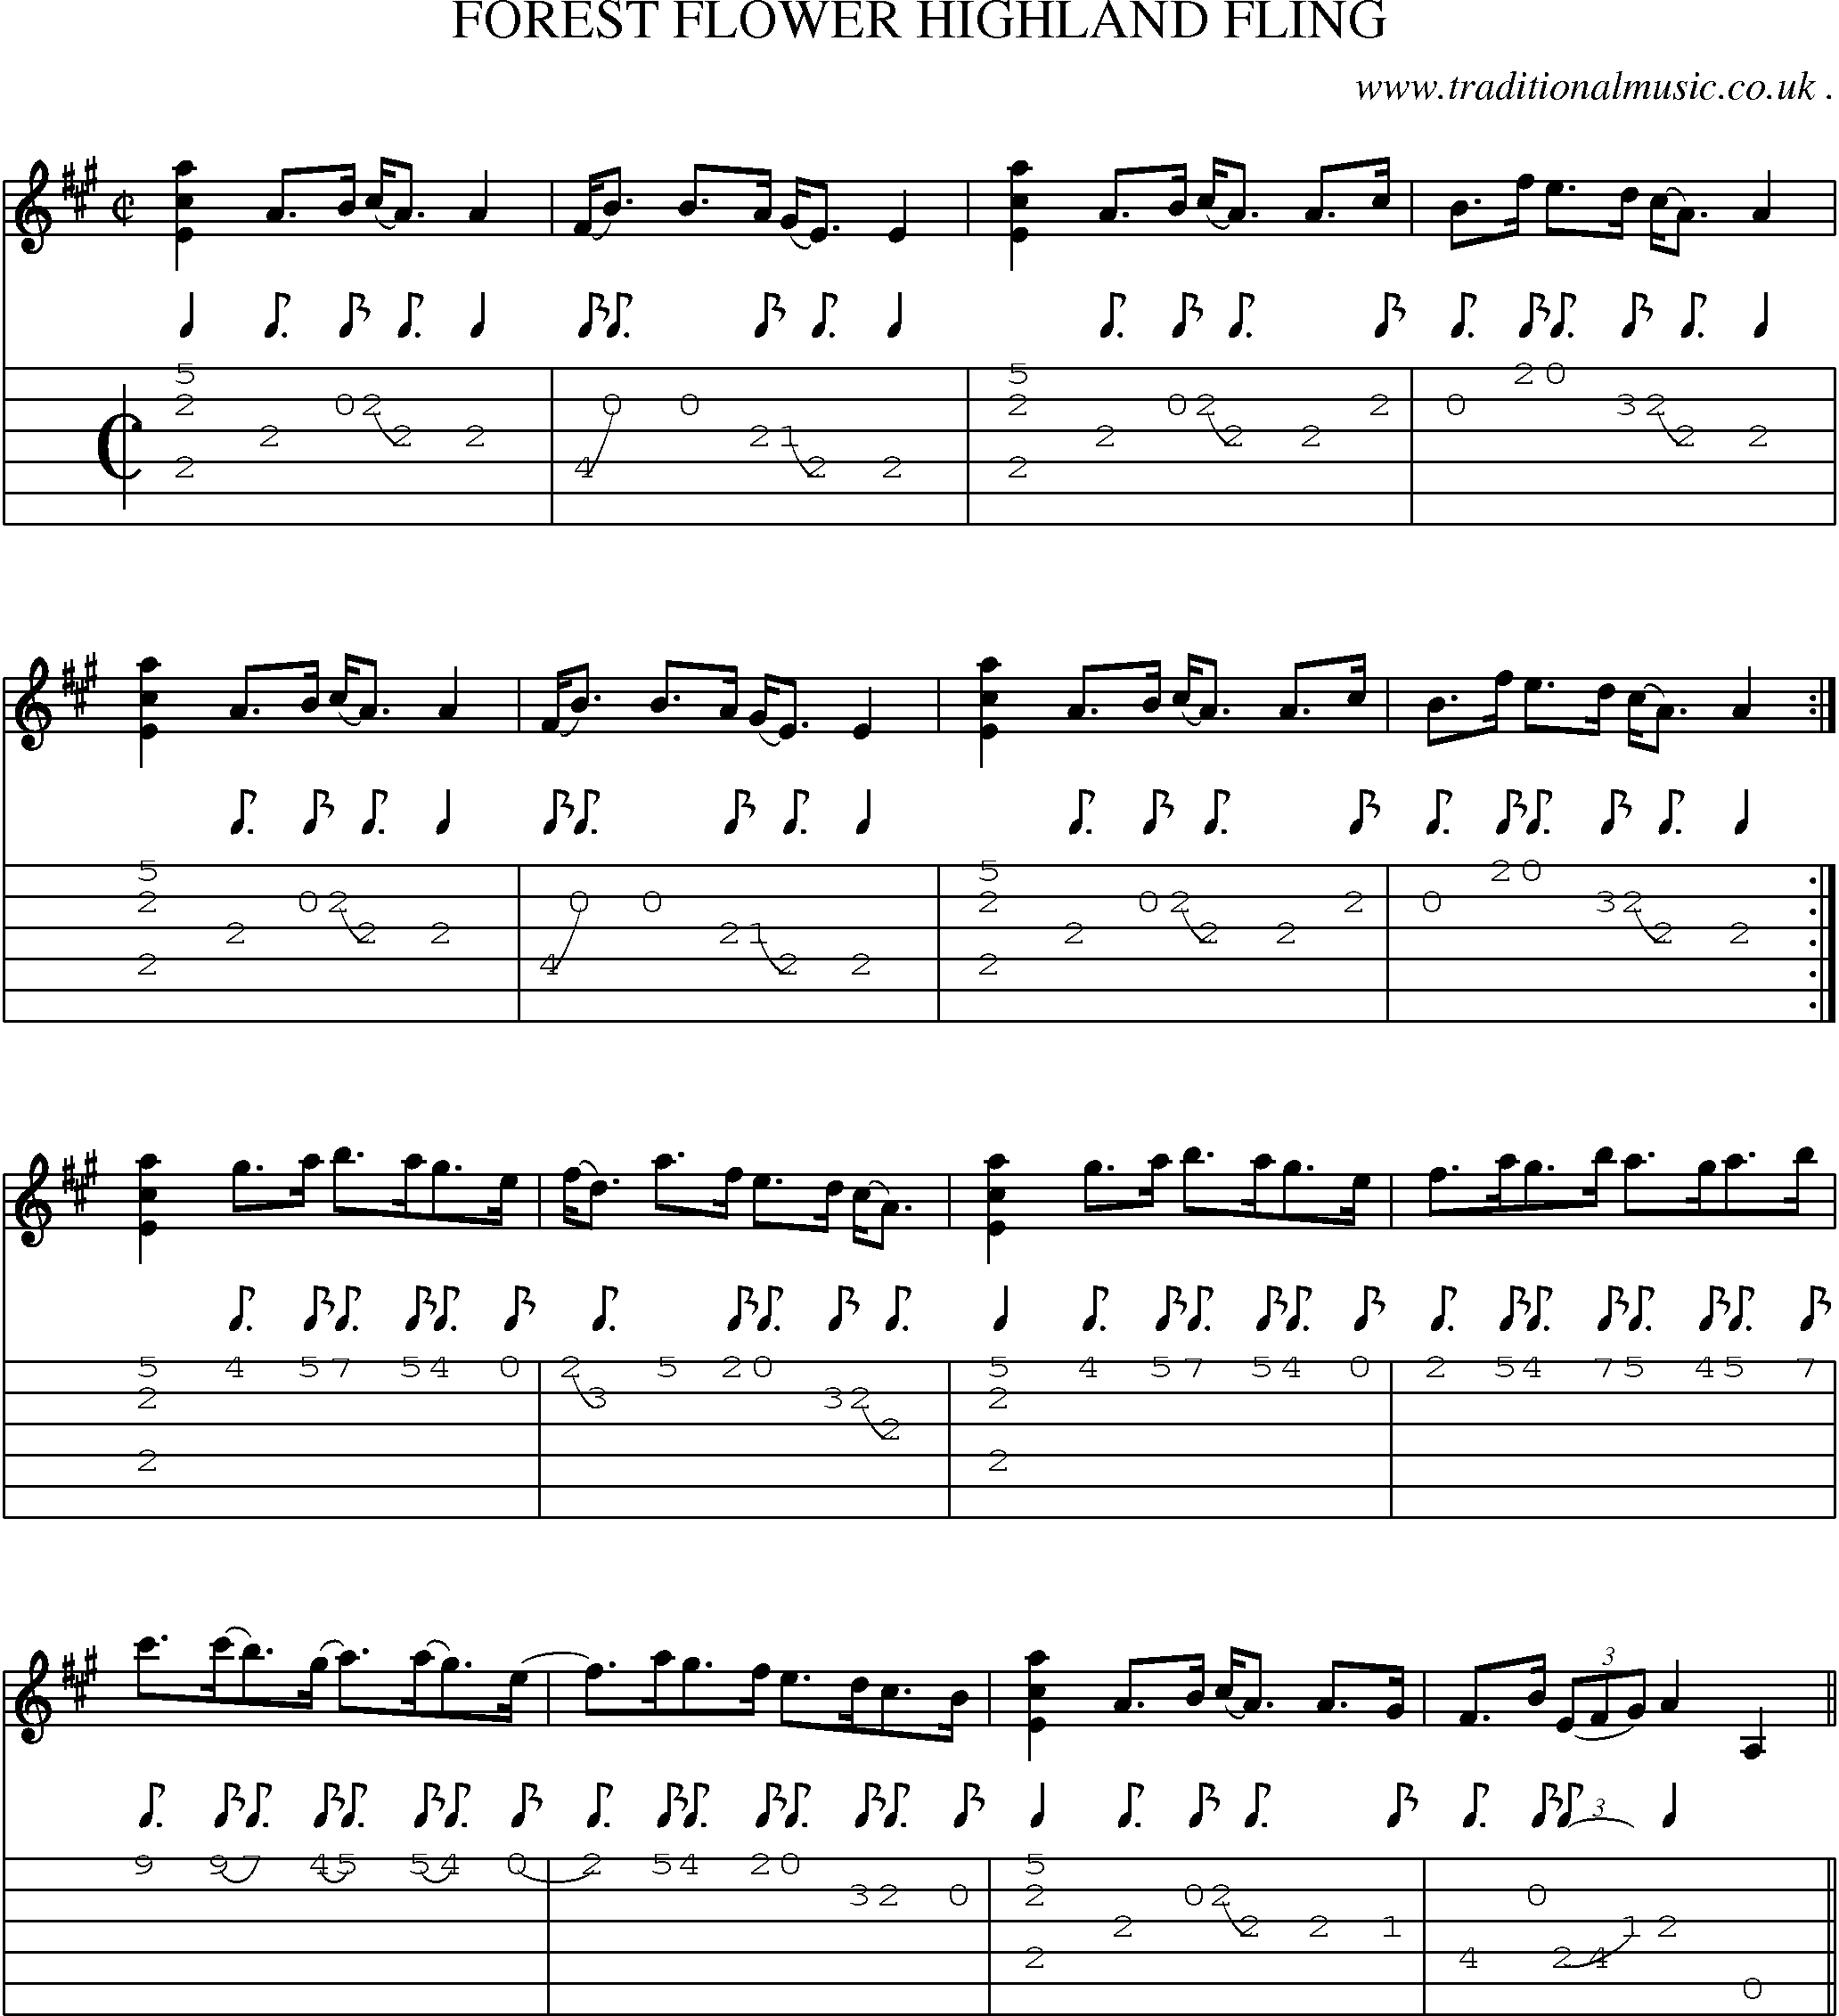 Sheet-Music and Guitar Tabs for Forest Flower Highland Fling